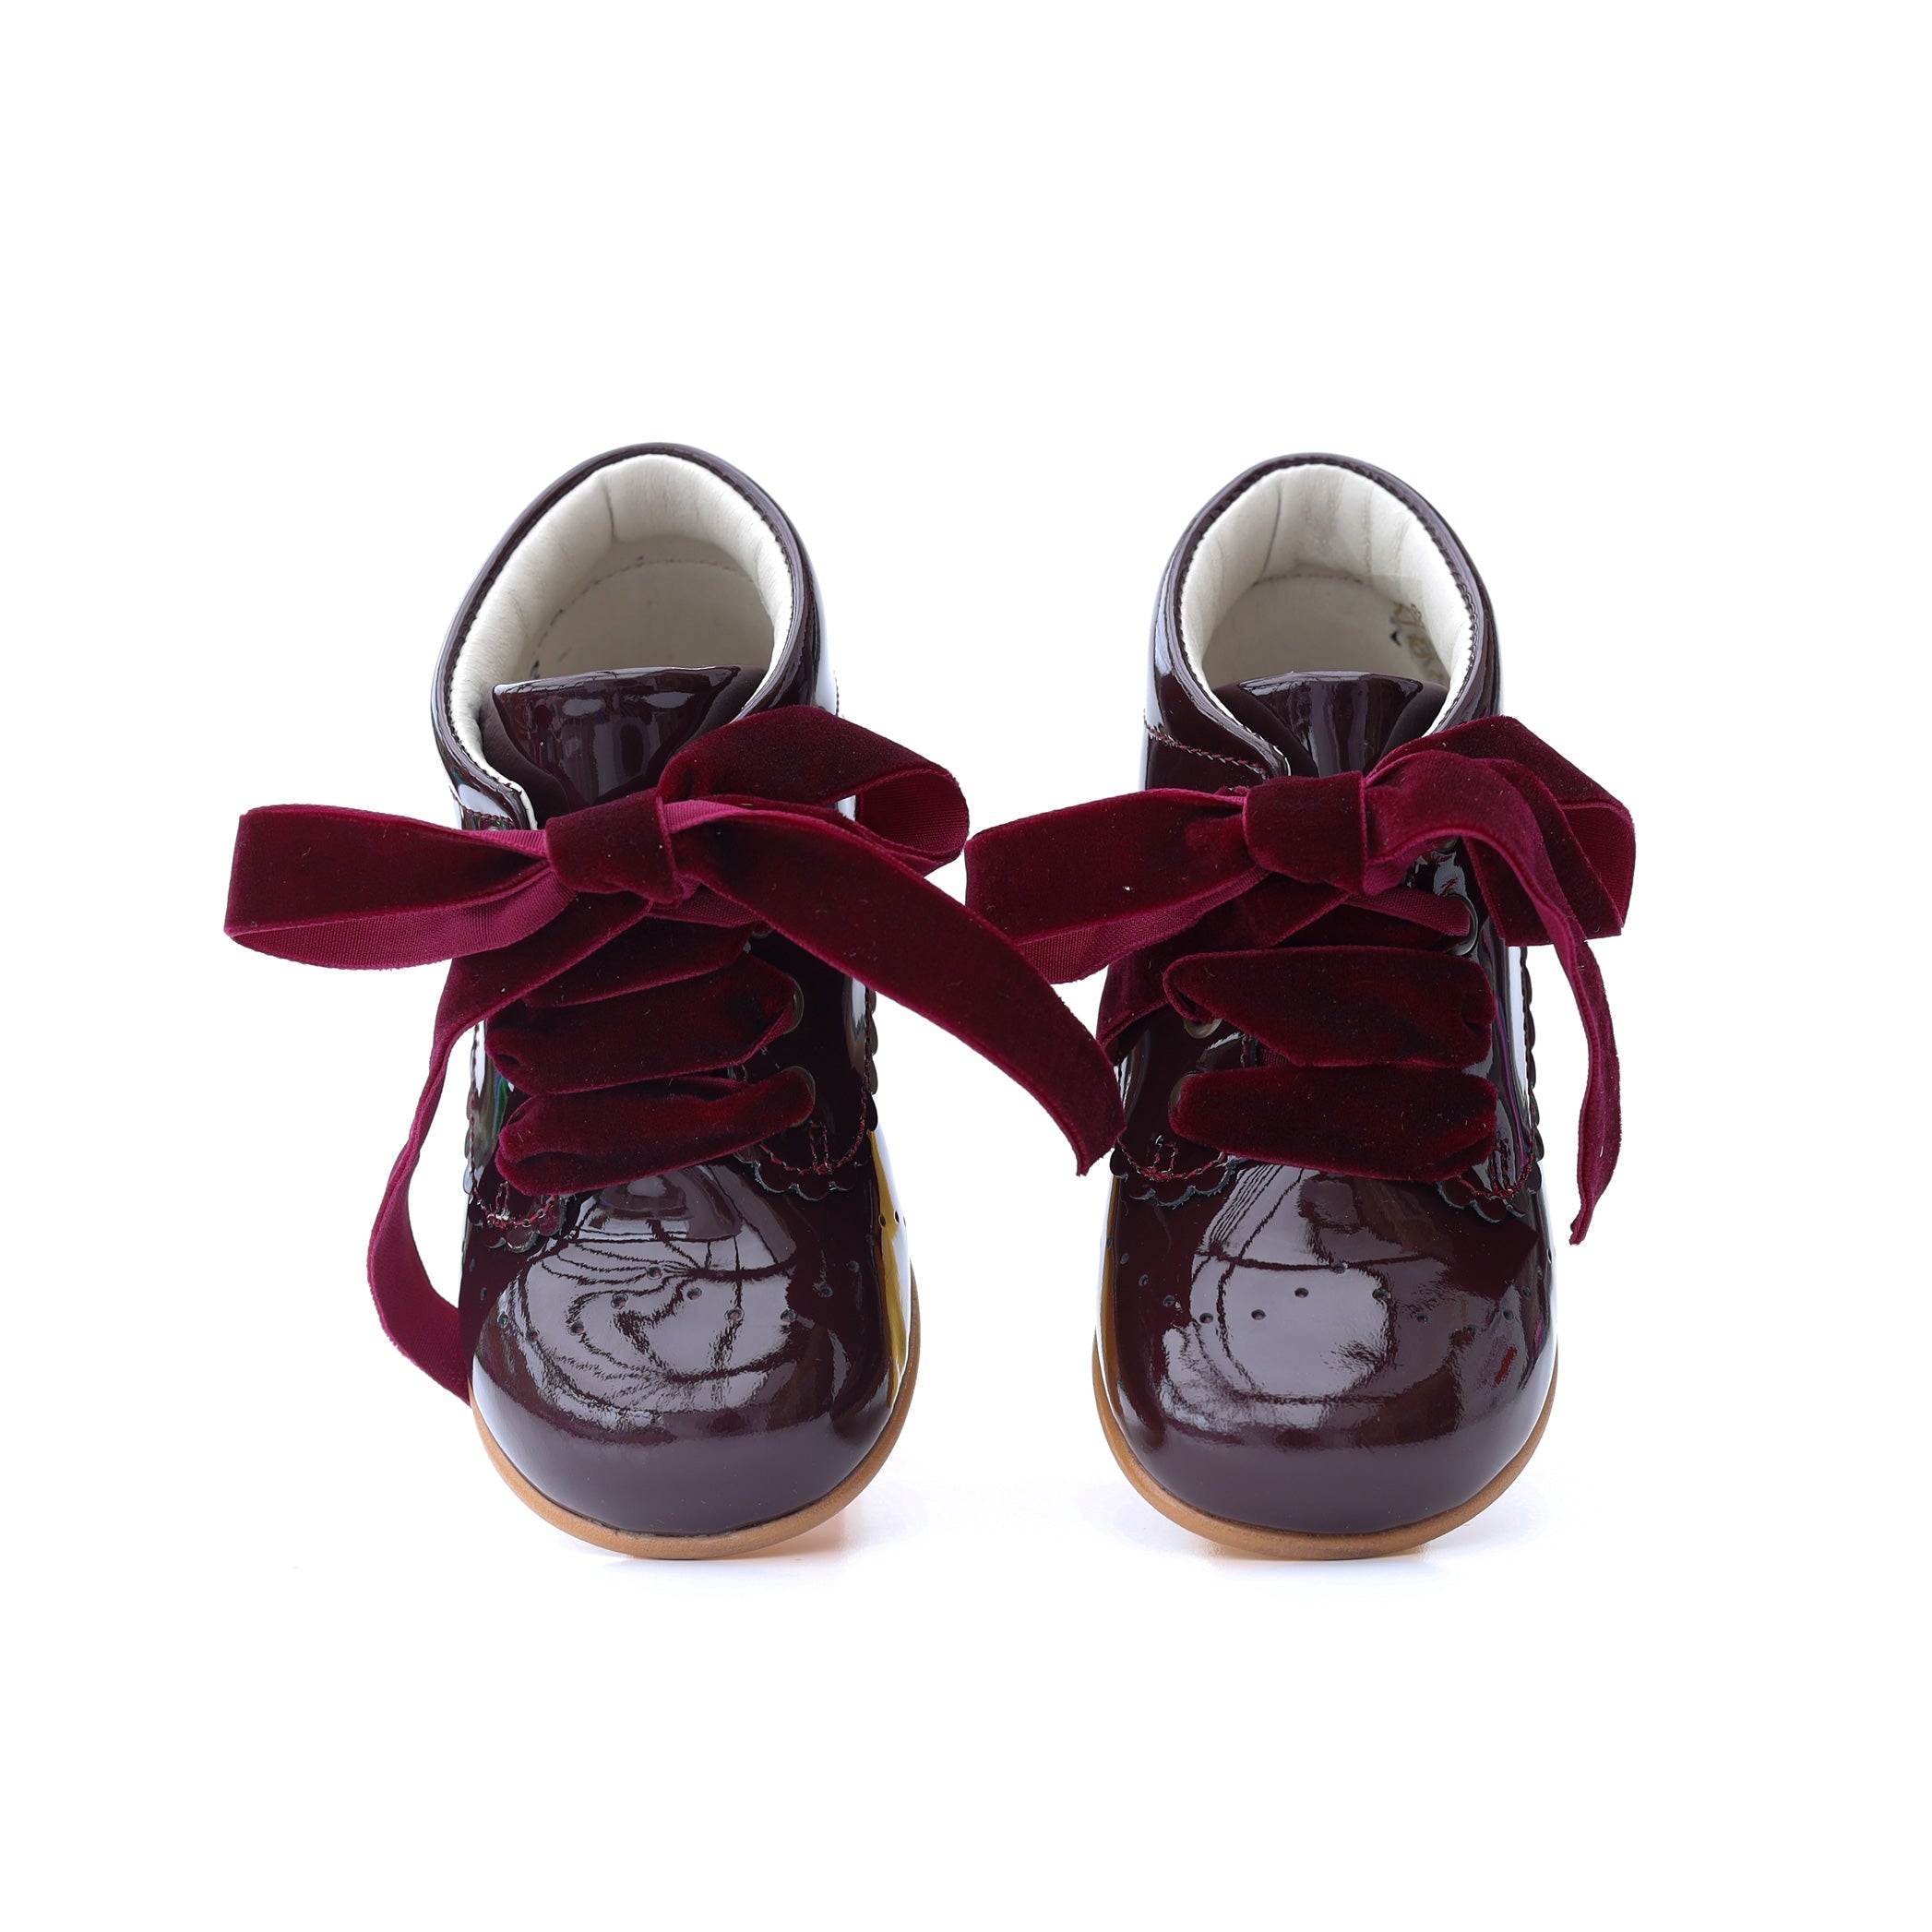 burgundy leather patent boots for girls